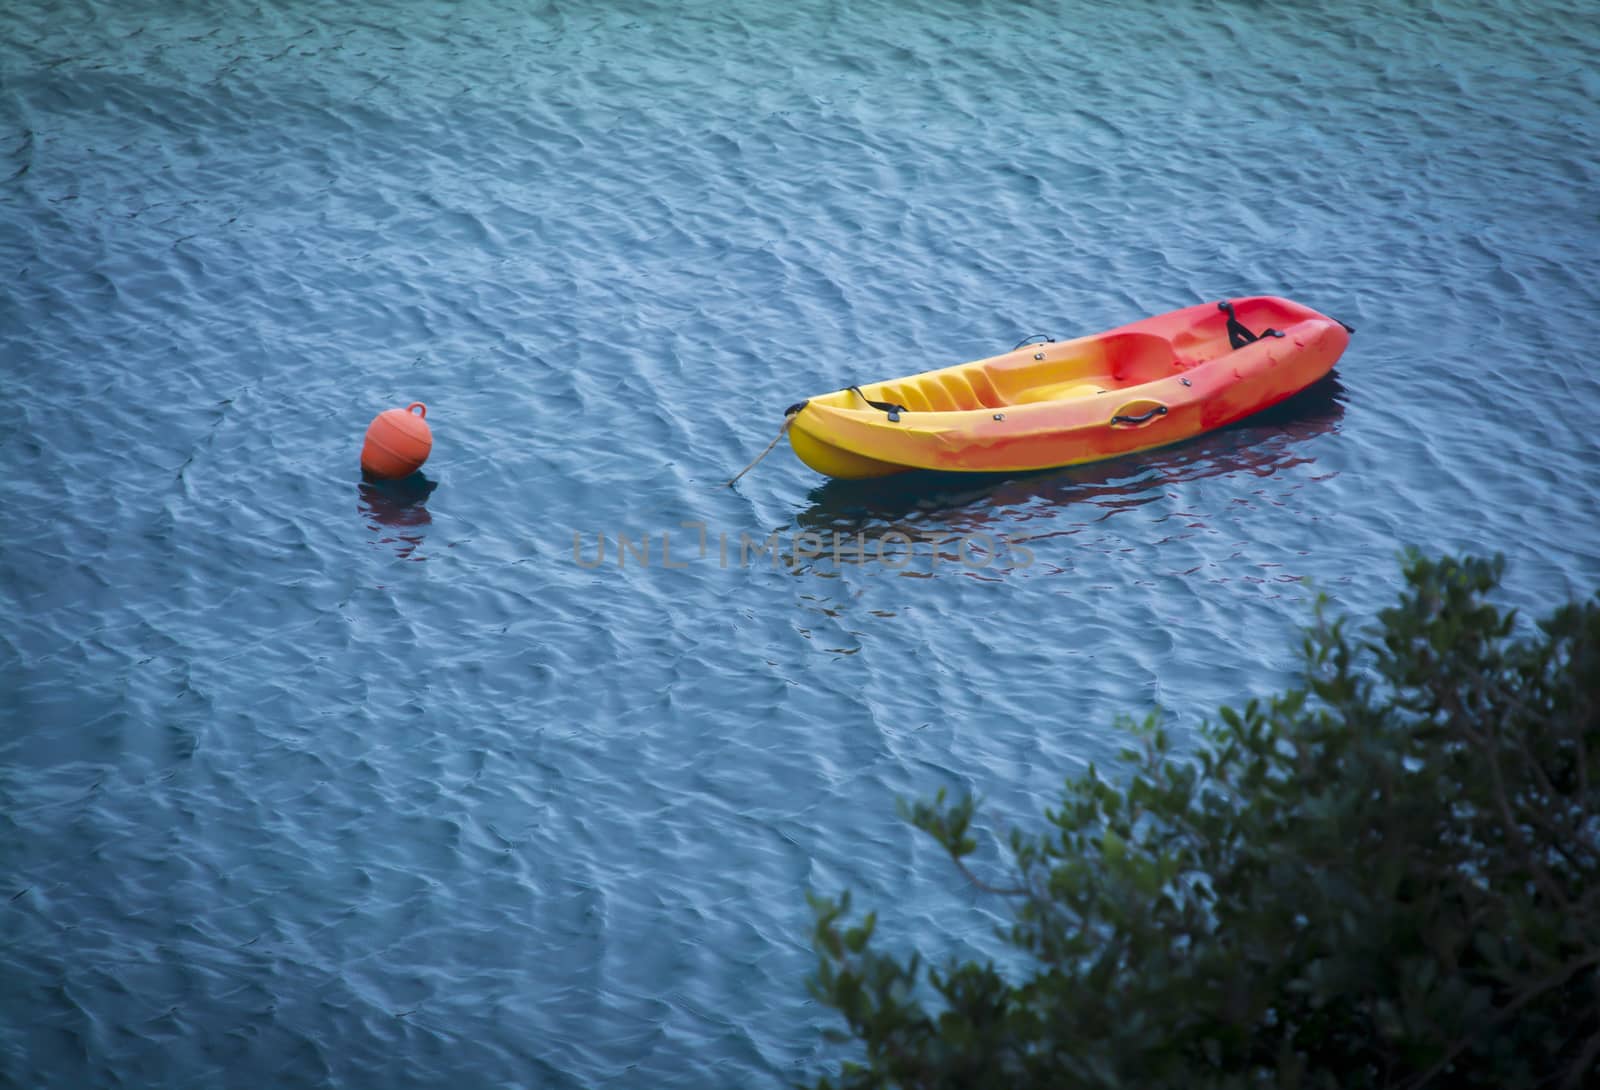 Moored yellow red plastic lifeboat in blue water. Mallorca, Balearic islands, Spain in October.